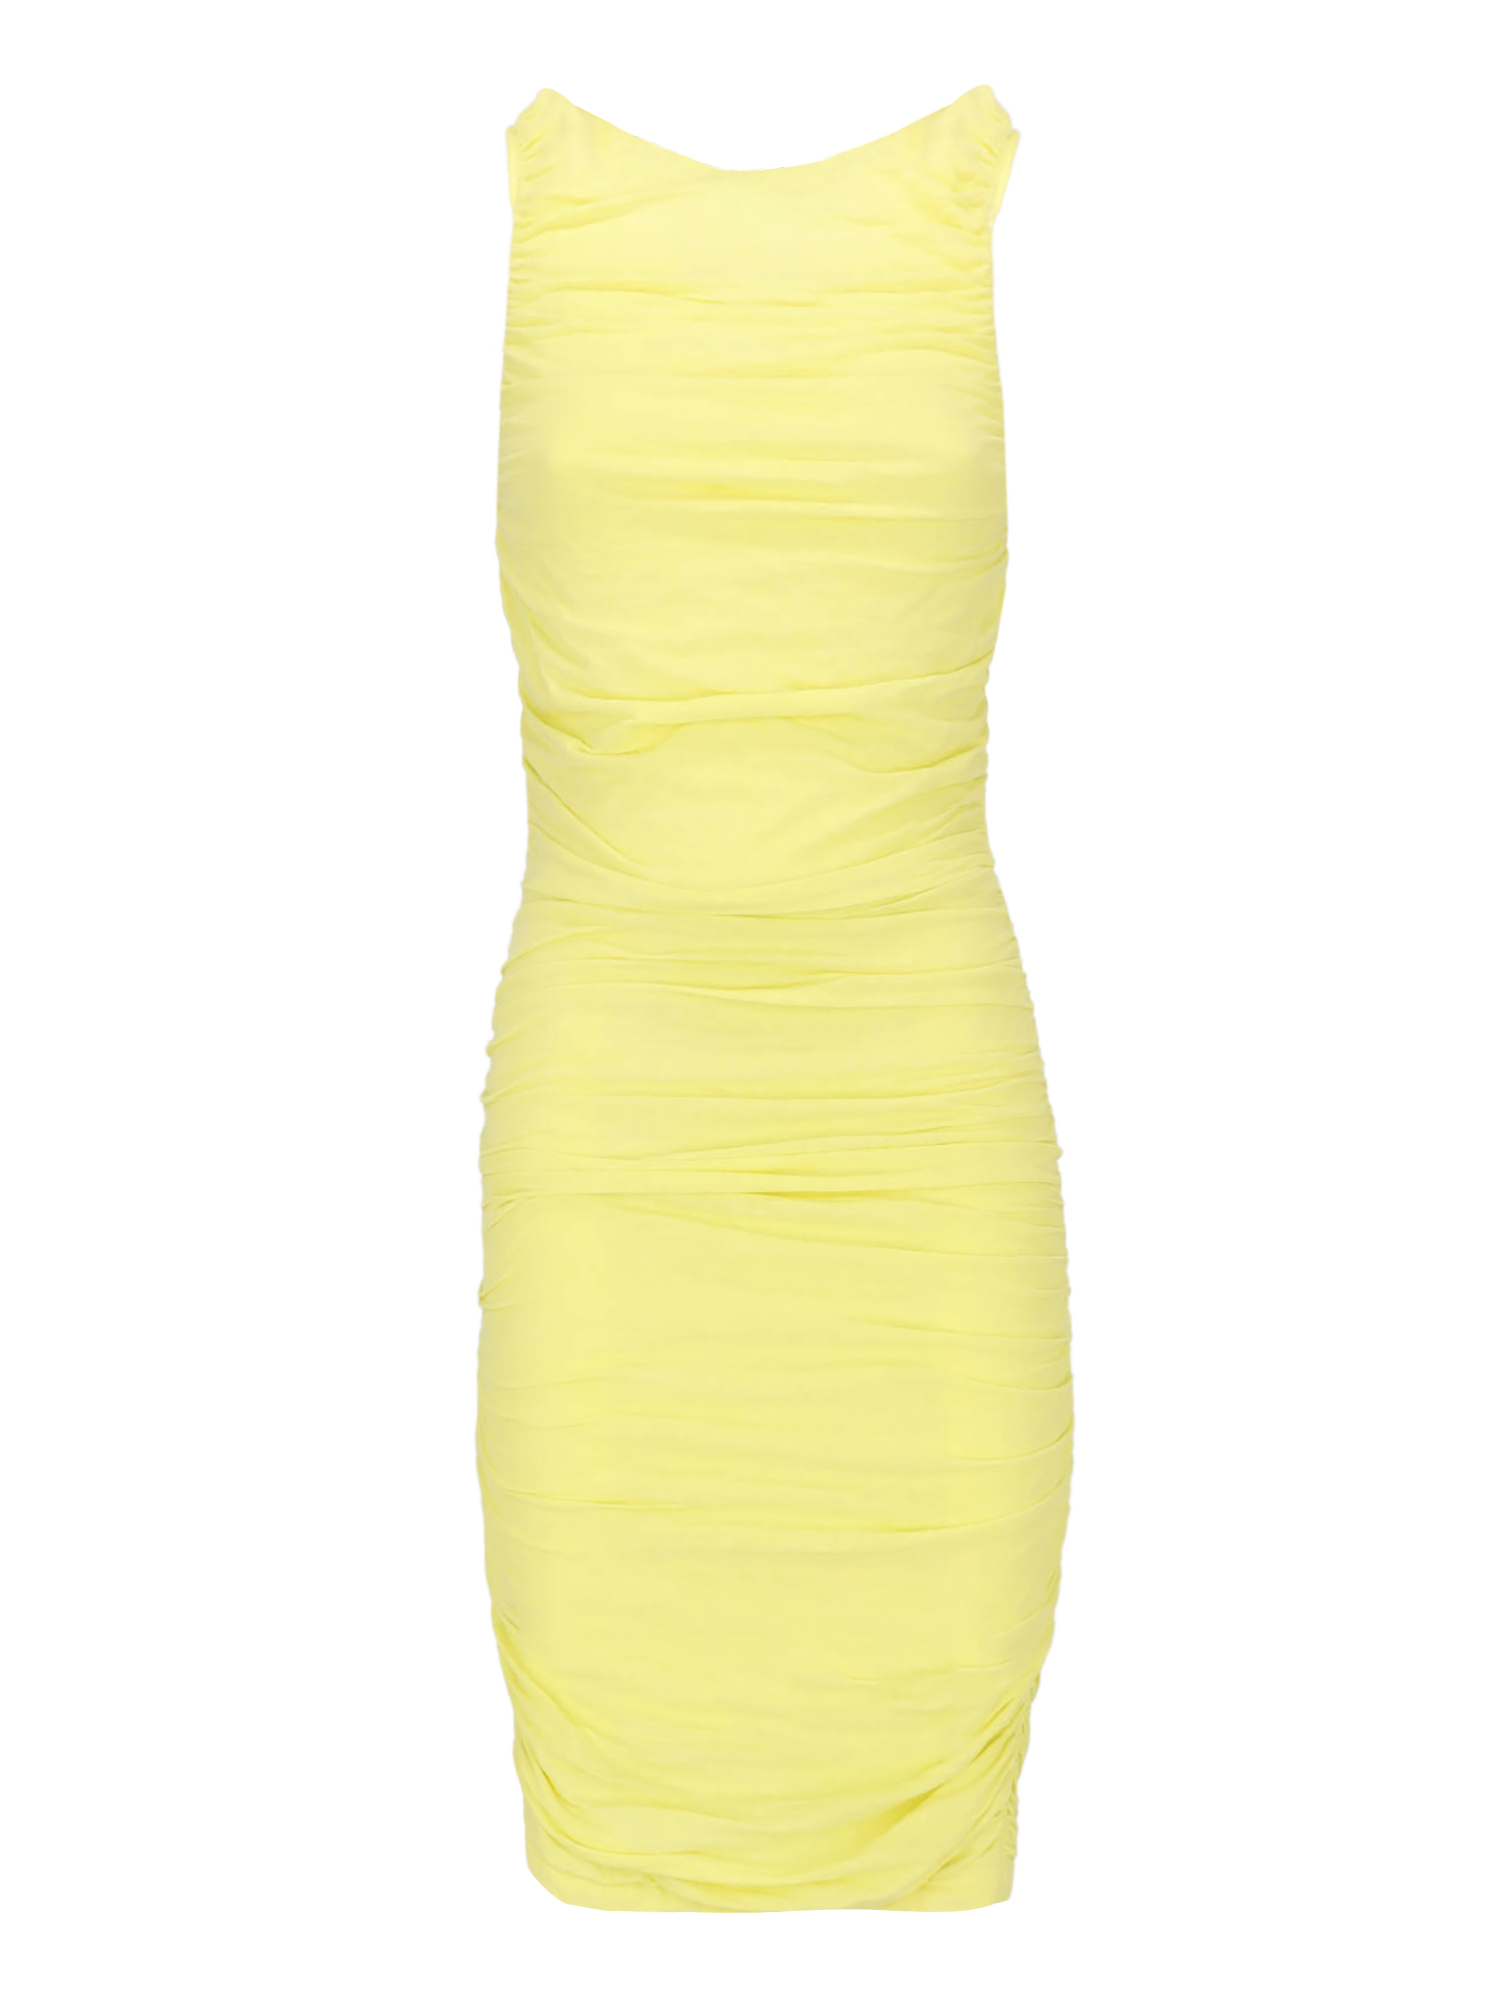 Alice + Olivia - Condition: very good, solid color cotton, color: yellow - m -  -